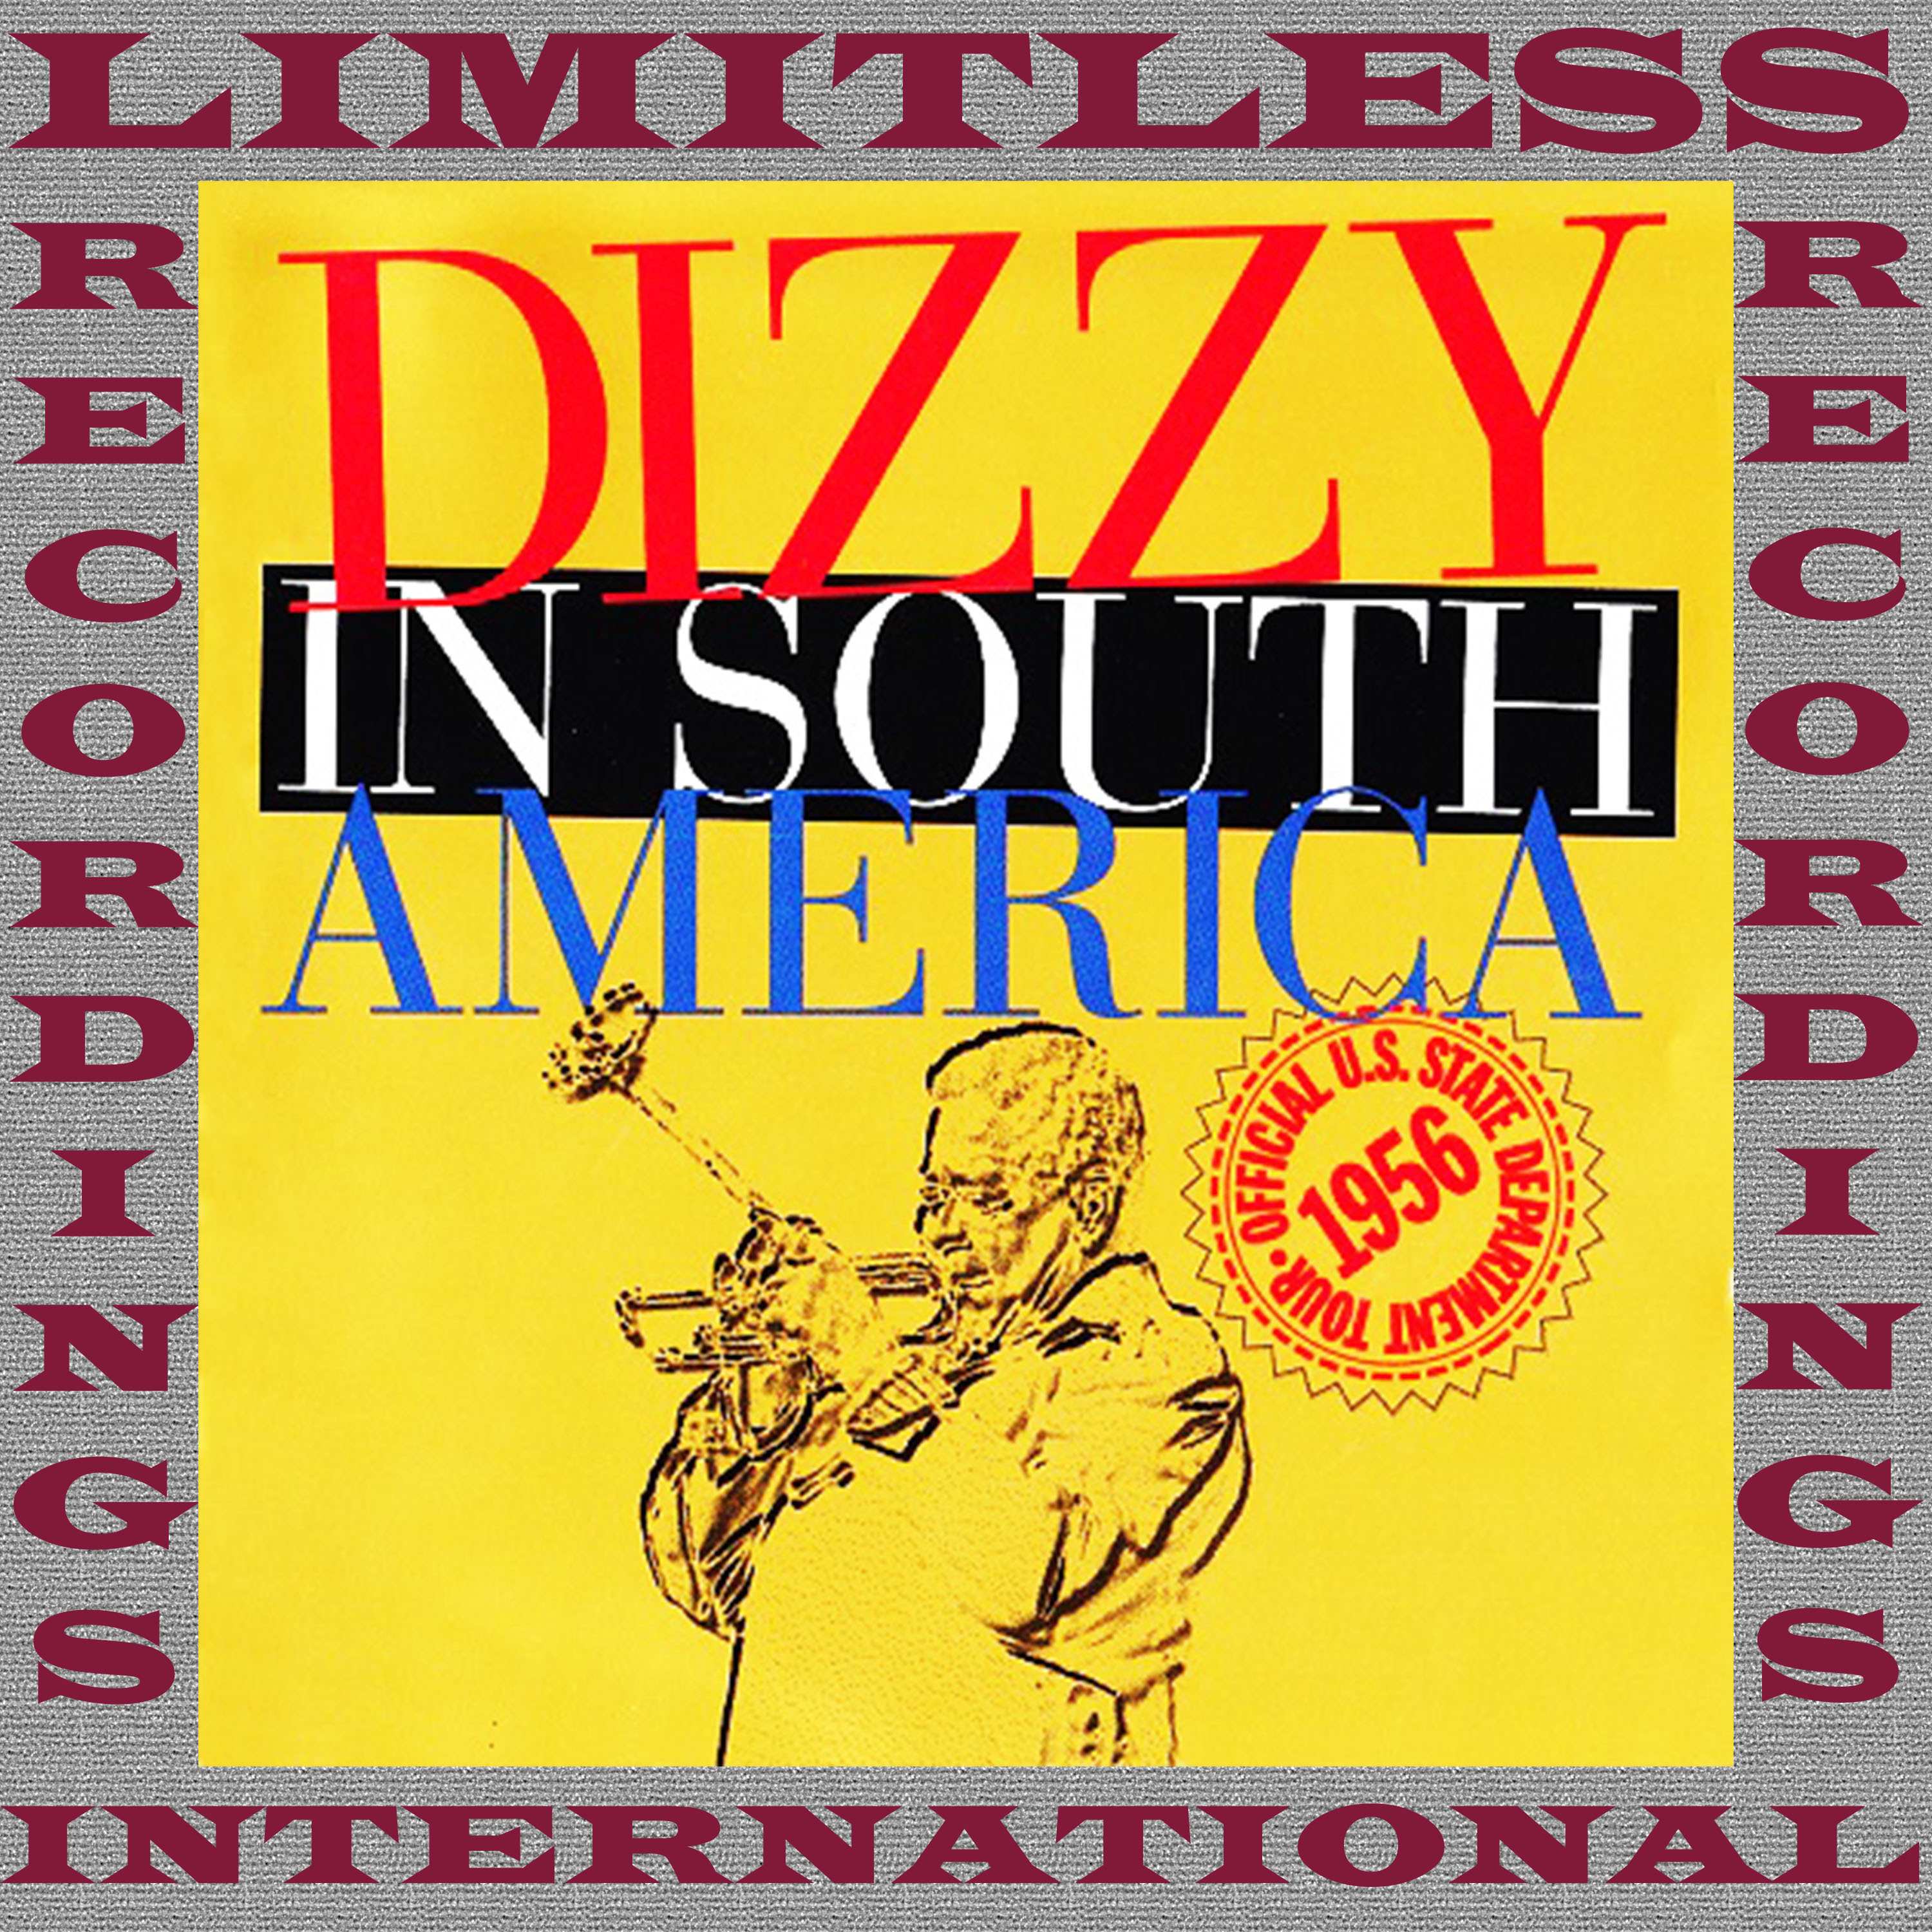 The Complete Dizzy In South America Recordings